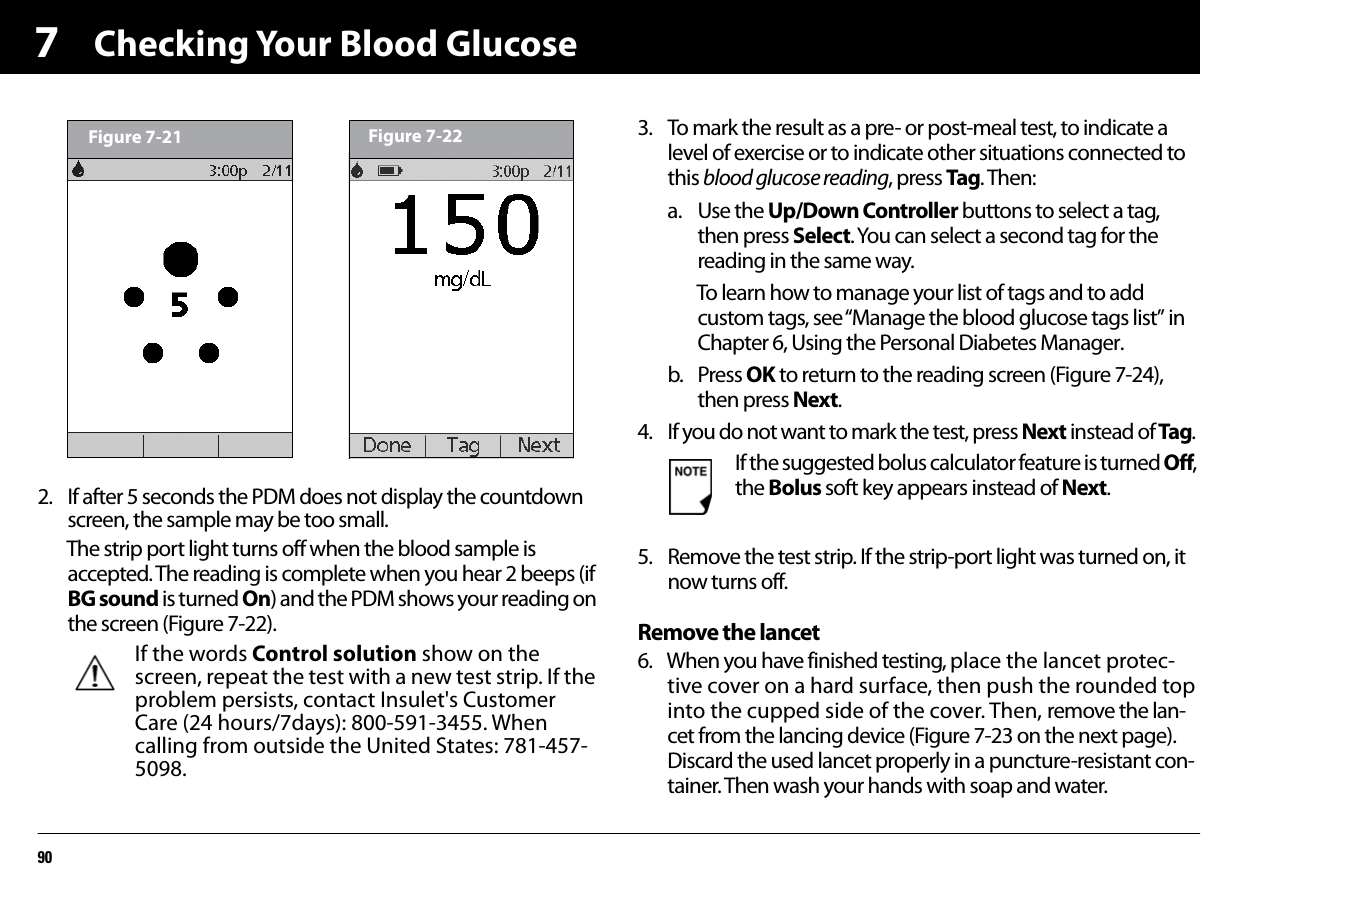 Checking Your Blood Glucose9072. If after 5 seconds the PDM does not display the countdown screen, the sample may be too small. The strip port light turns off when the blood sample is accepted. The reading is complete when you hear 2 beeps (if BG sound is turned On) and the PDM shows your reading on the screen (Figure 7-22).3. To mark the result as a pre- or post-meal test, to indicate a level of exercise or to indicate other situations connected to this blood glucose reading, press Tag. Then:a. Use the Up/Down Controller buttons to select a tag, then press Select. You can select a second tag for the reading in the same way.To learn how to manage your list of tags and to add custom tags, see “Manage the blood glucose tags list” in Chapter 6, Using the Personal Diabetes Manager. b. Press OK to return to the reading screen (Figure 7-24), then press Next.4. If you do not want to mark the test, press Next instead of Tag.5. Remove the test strip. If the strip-port light was turned on, it now turns off.Remove the lancet6. When you have finished testing, place the lancet protec-tive cover on a hard surface, then push the rounded top into the cupped side of the cover. Then, remove the lan-cet from the lancing device (Figure 7-23 on the next page). Discard the used lancet properly in a puncture-resistant con-tainer. Then wash your hands with soap and water.If the words Control solution show on the screen, repeat the test with a new test strip. If the problem persists, contact Insulet&apos;s Customer Care (24 hours/7days): 800-591-3455. When calling from outside the United States: 781-457-5098. Figure 7-21 Figure 7-22If the suggested bolus calculator feature is turned Off, the Bolus soft key appears instead of Next.